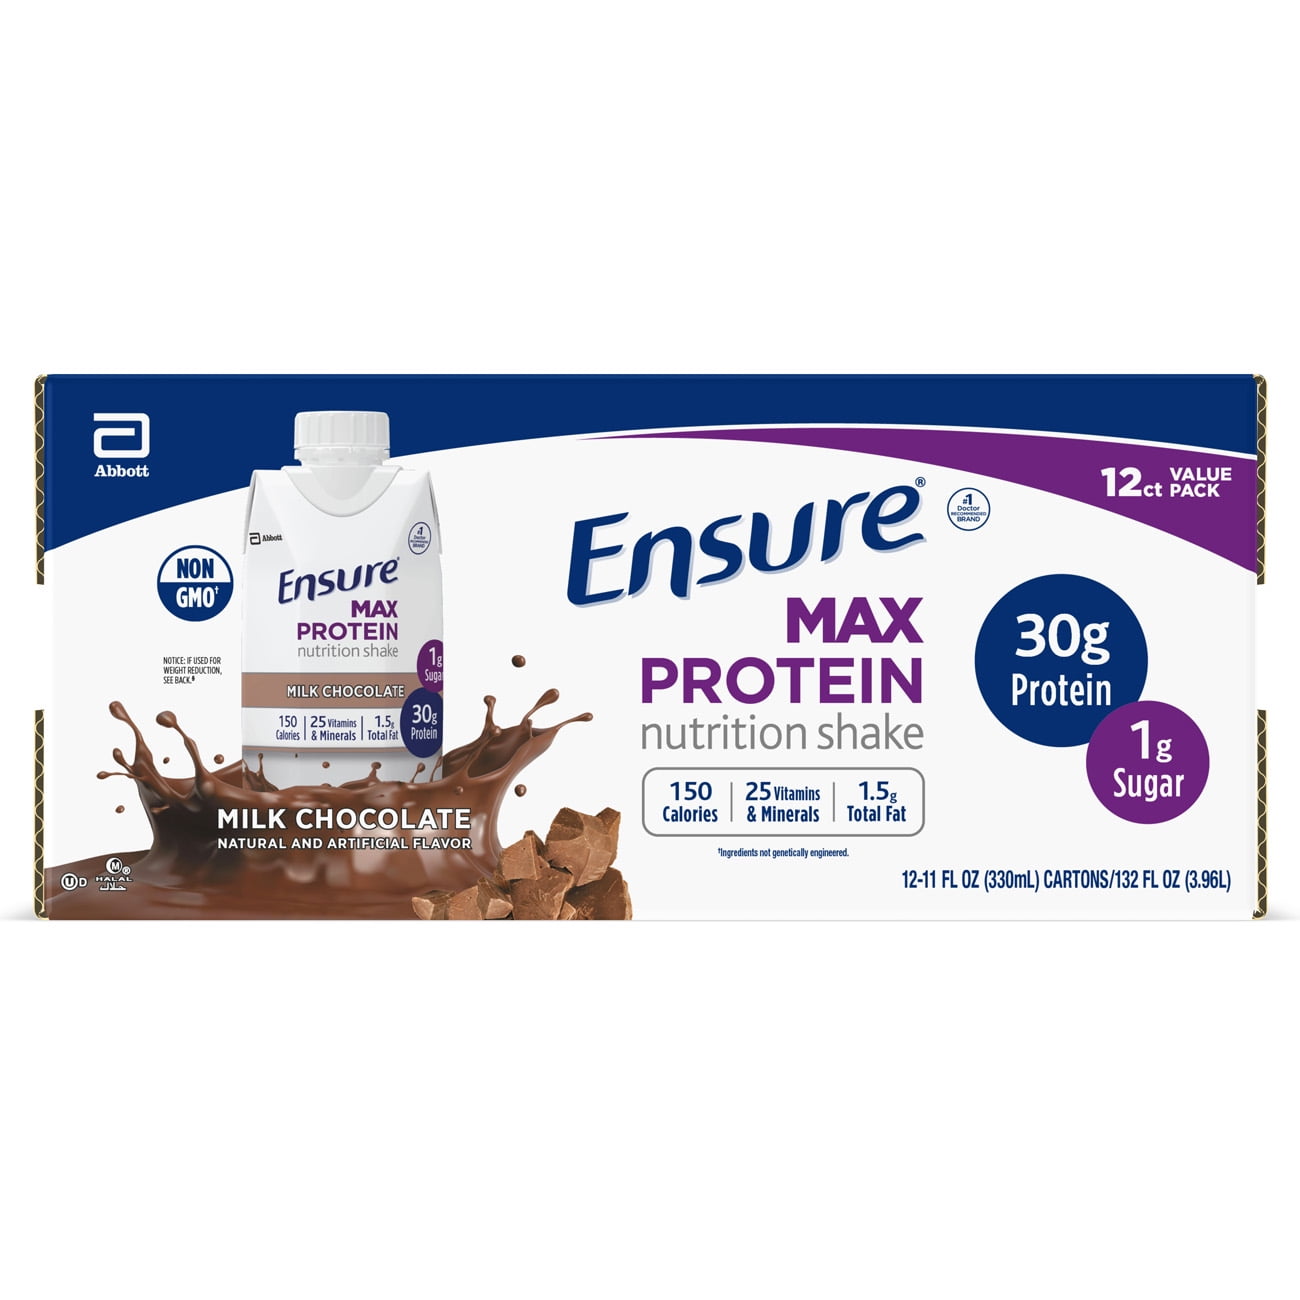 Ensure Max Protein Nutrition Shake with 30g of Protein, 1g of